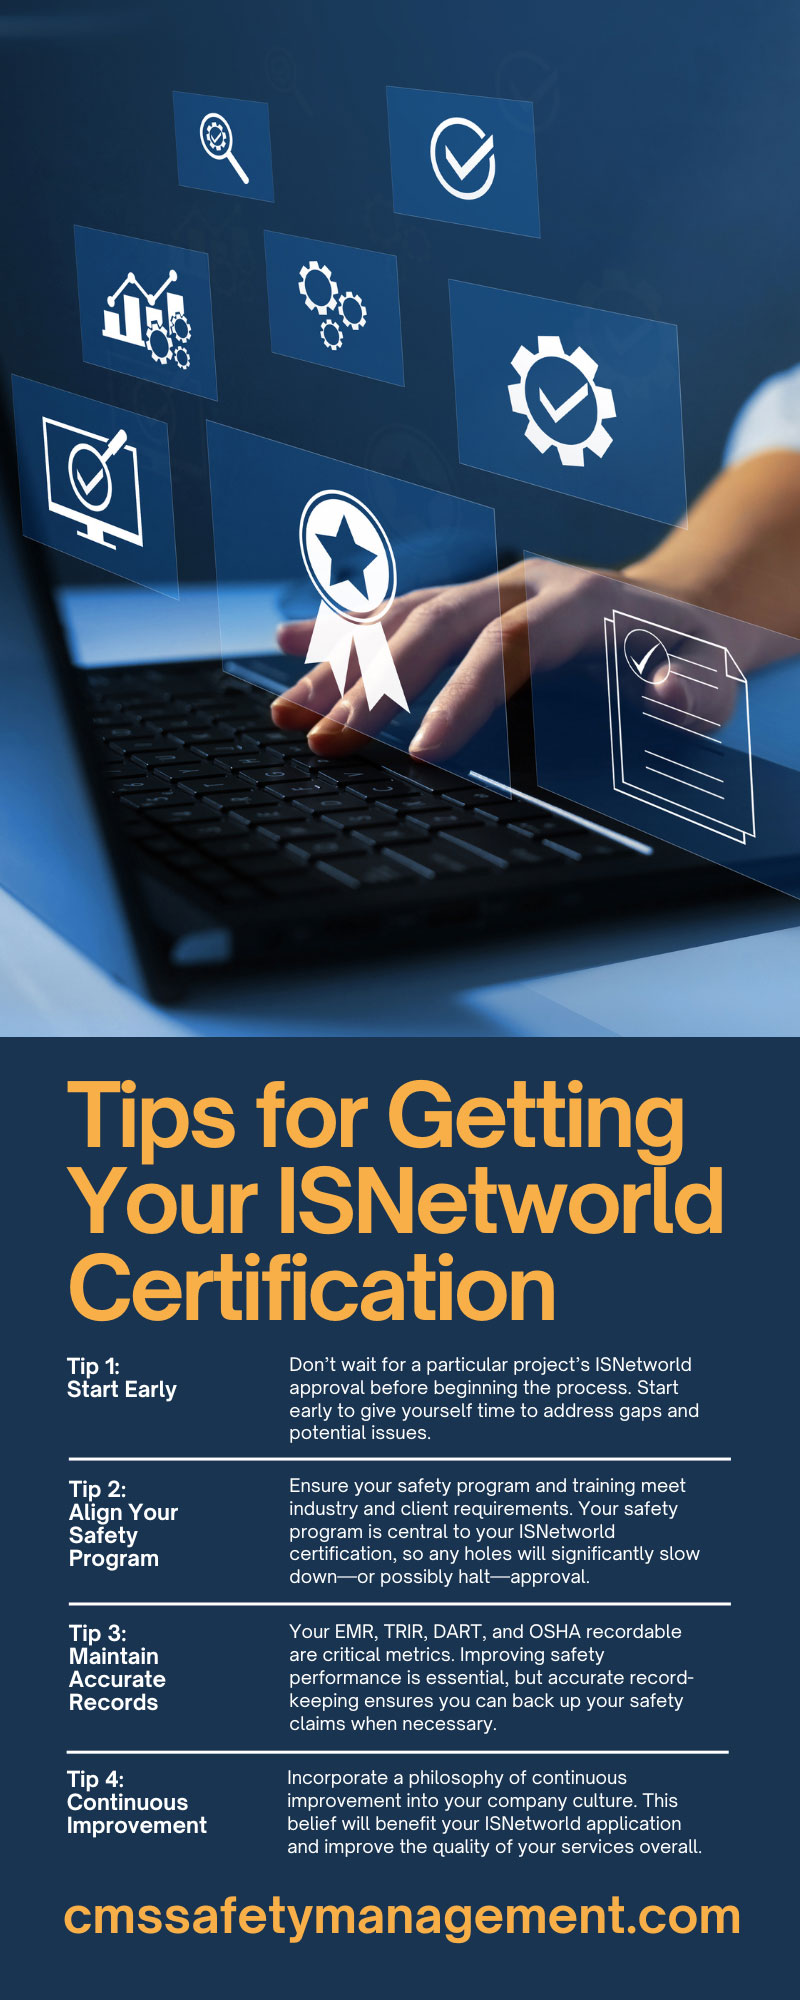 Tips for Getting Your ISNetworld Certification